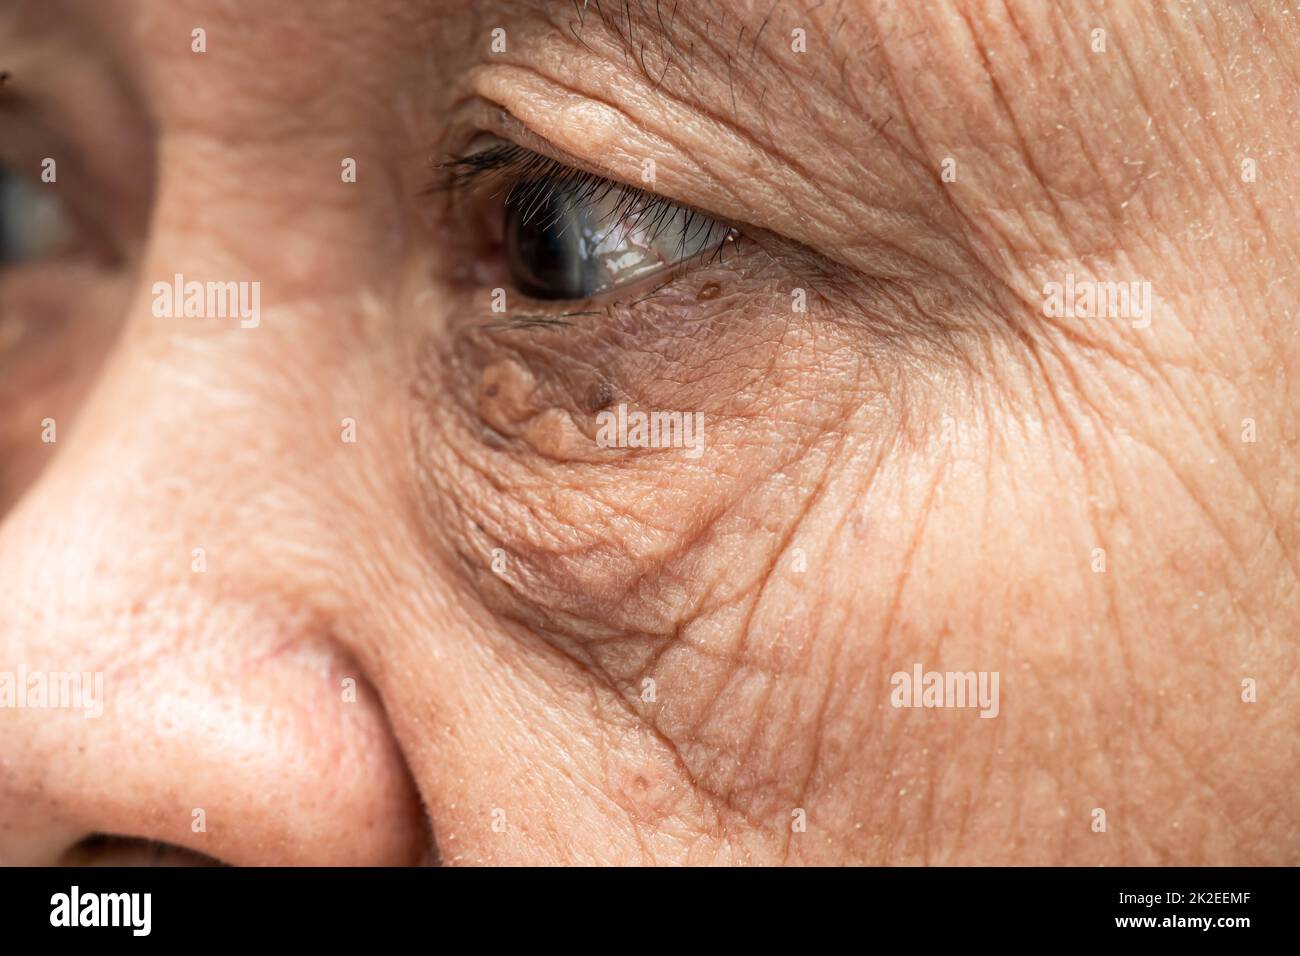 Asian elderly woman face and eye with wrinkles, portrait closeup view. Stock Photo